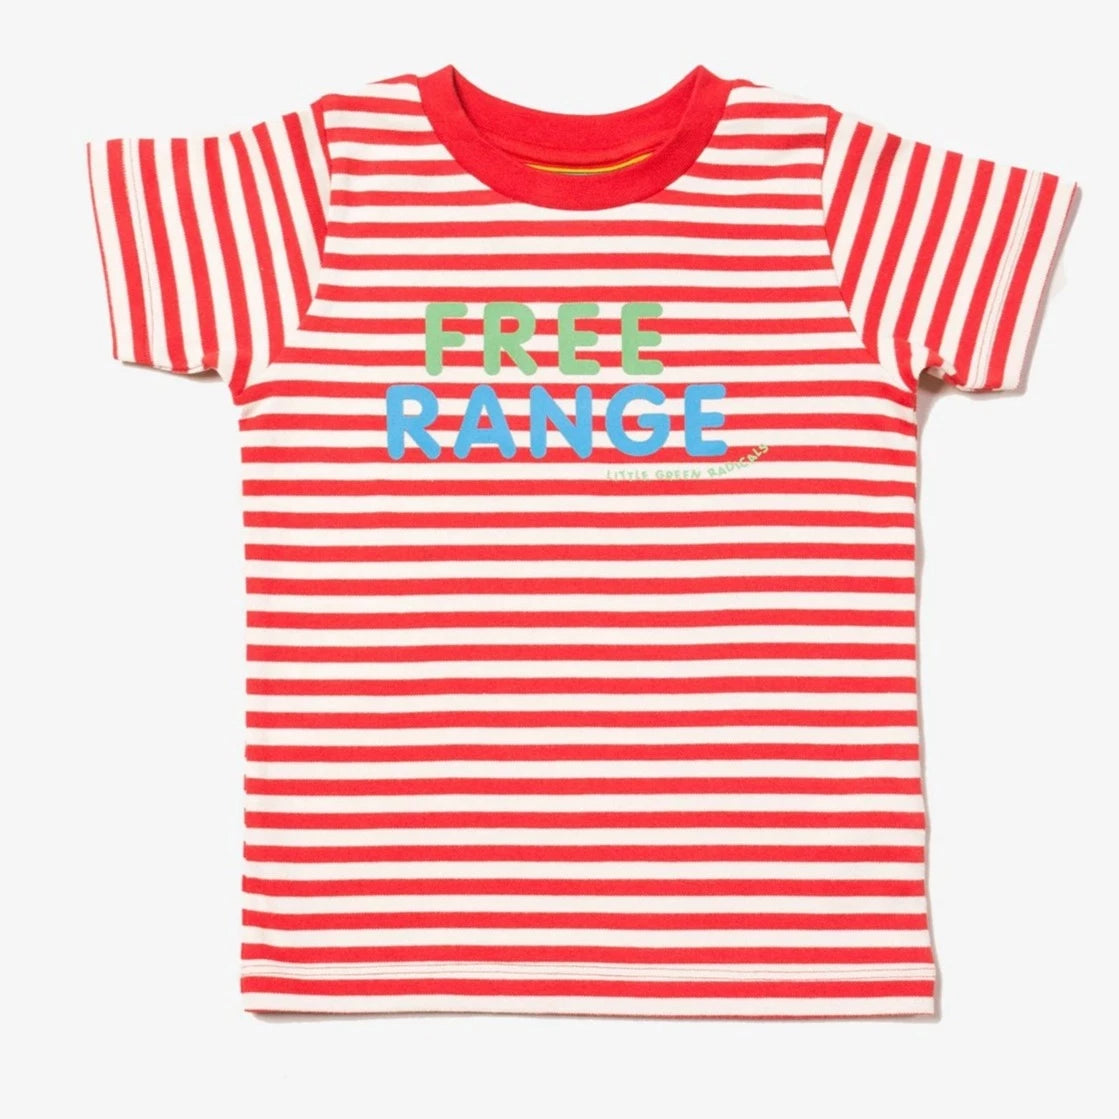 red and white striped tee with green and white screen printed Free Range logo on the front